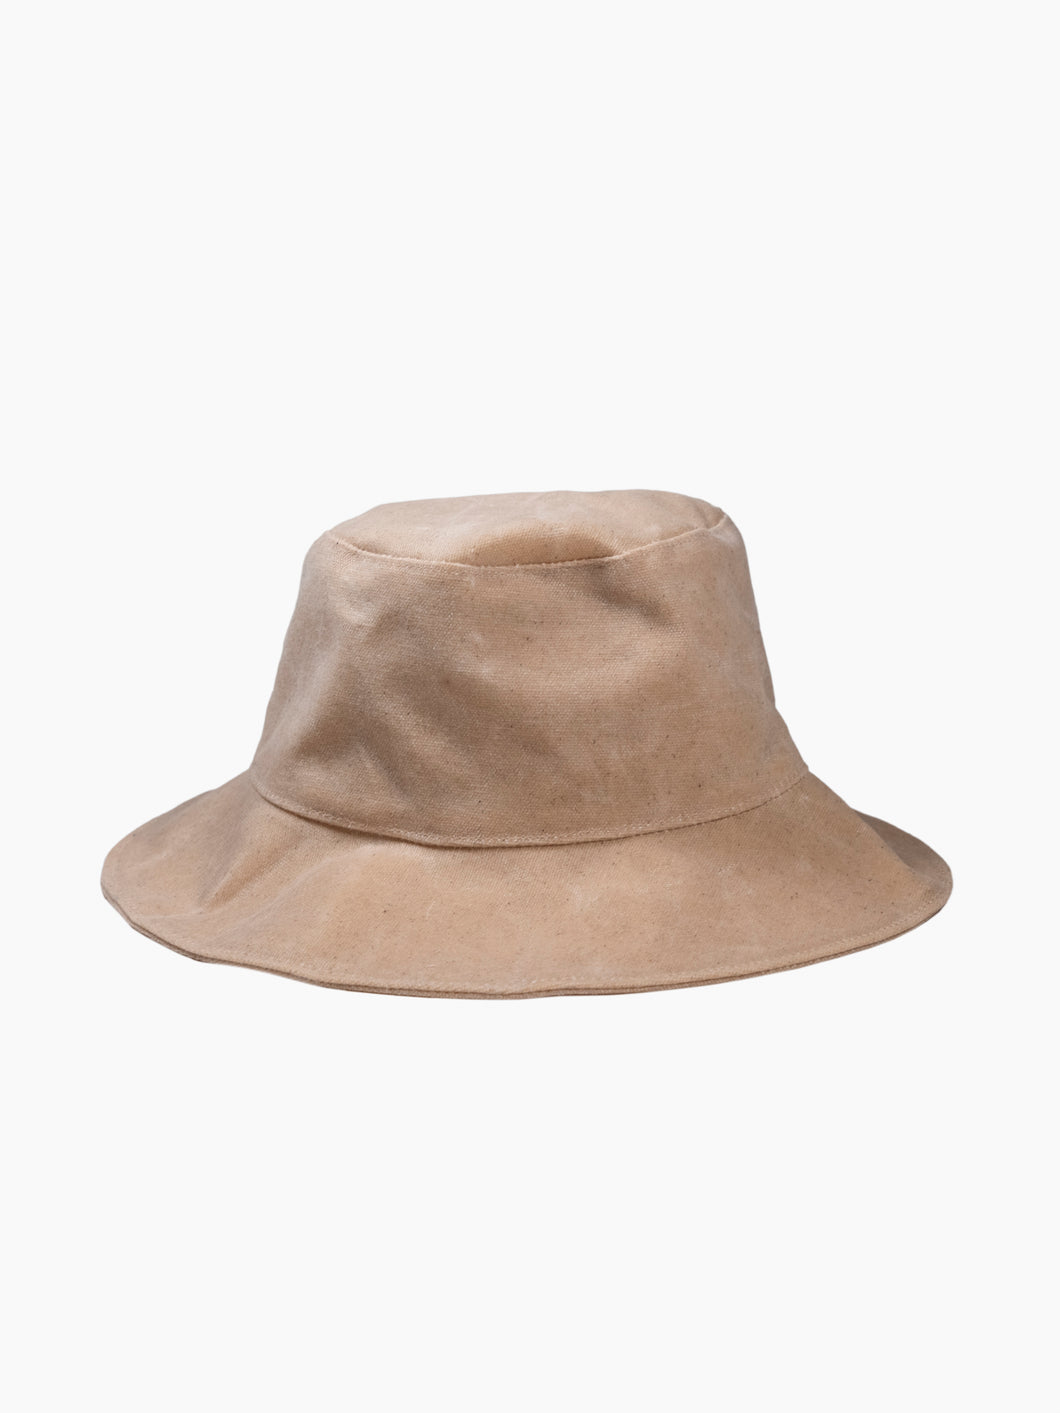 Adult Waxed Canvas Hat, Natural